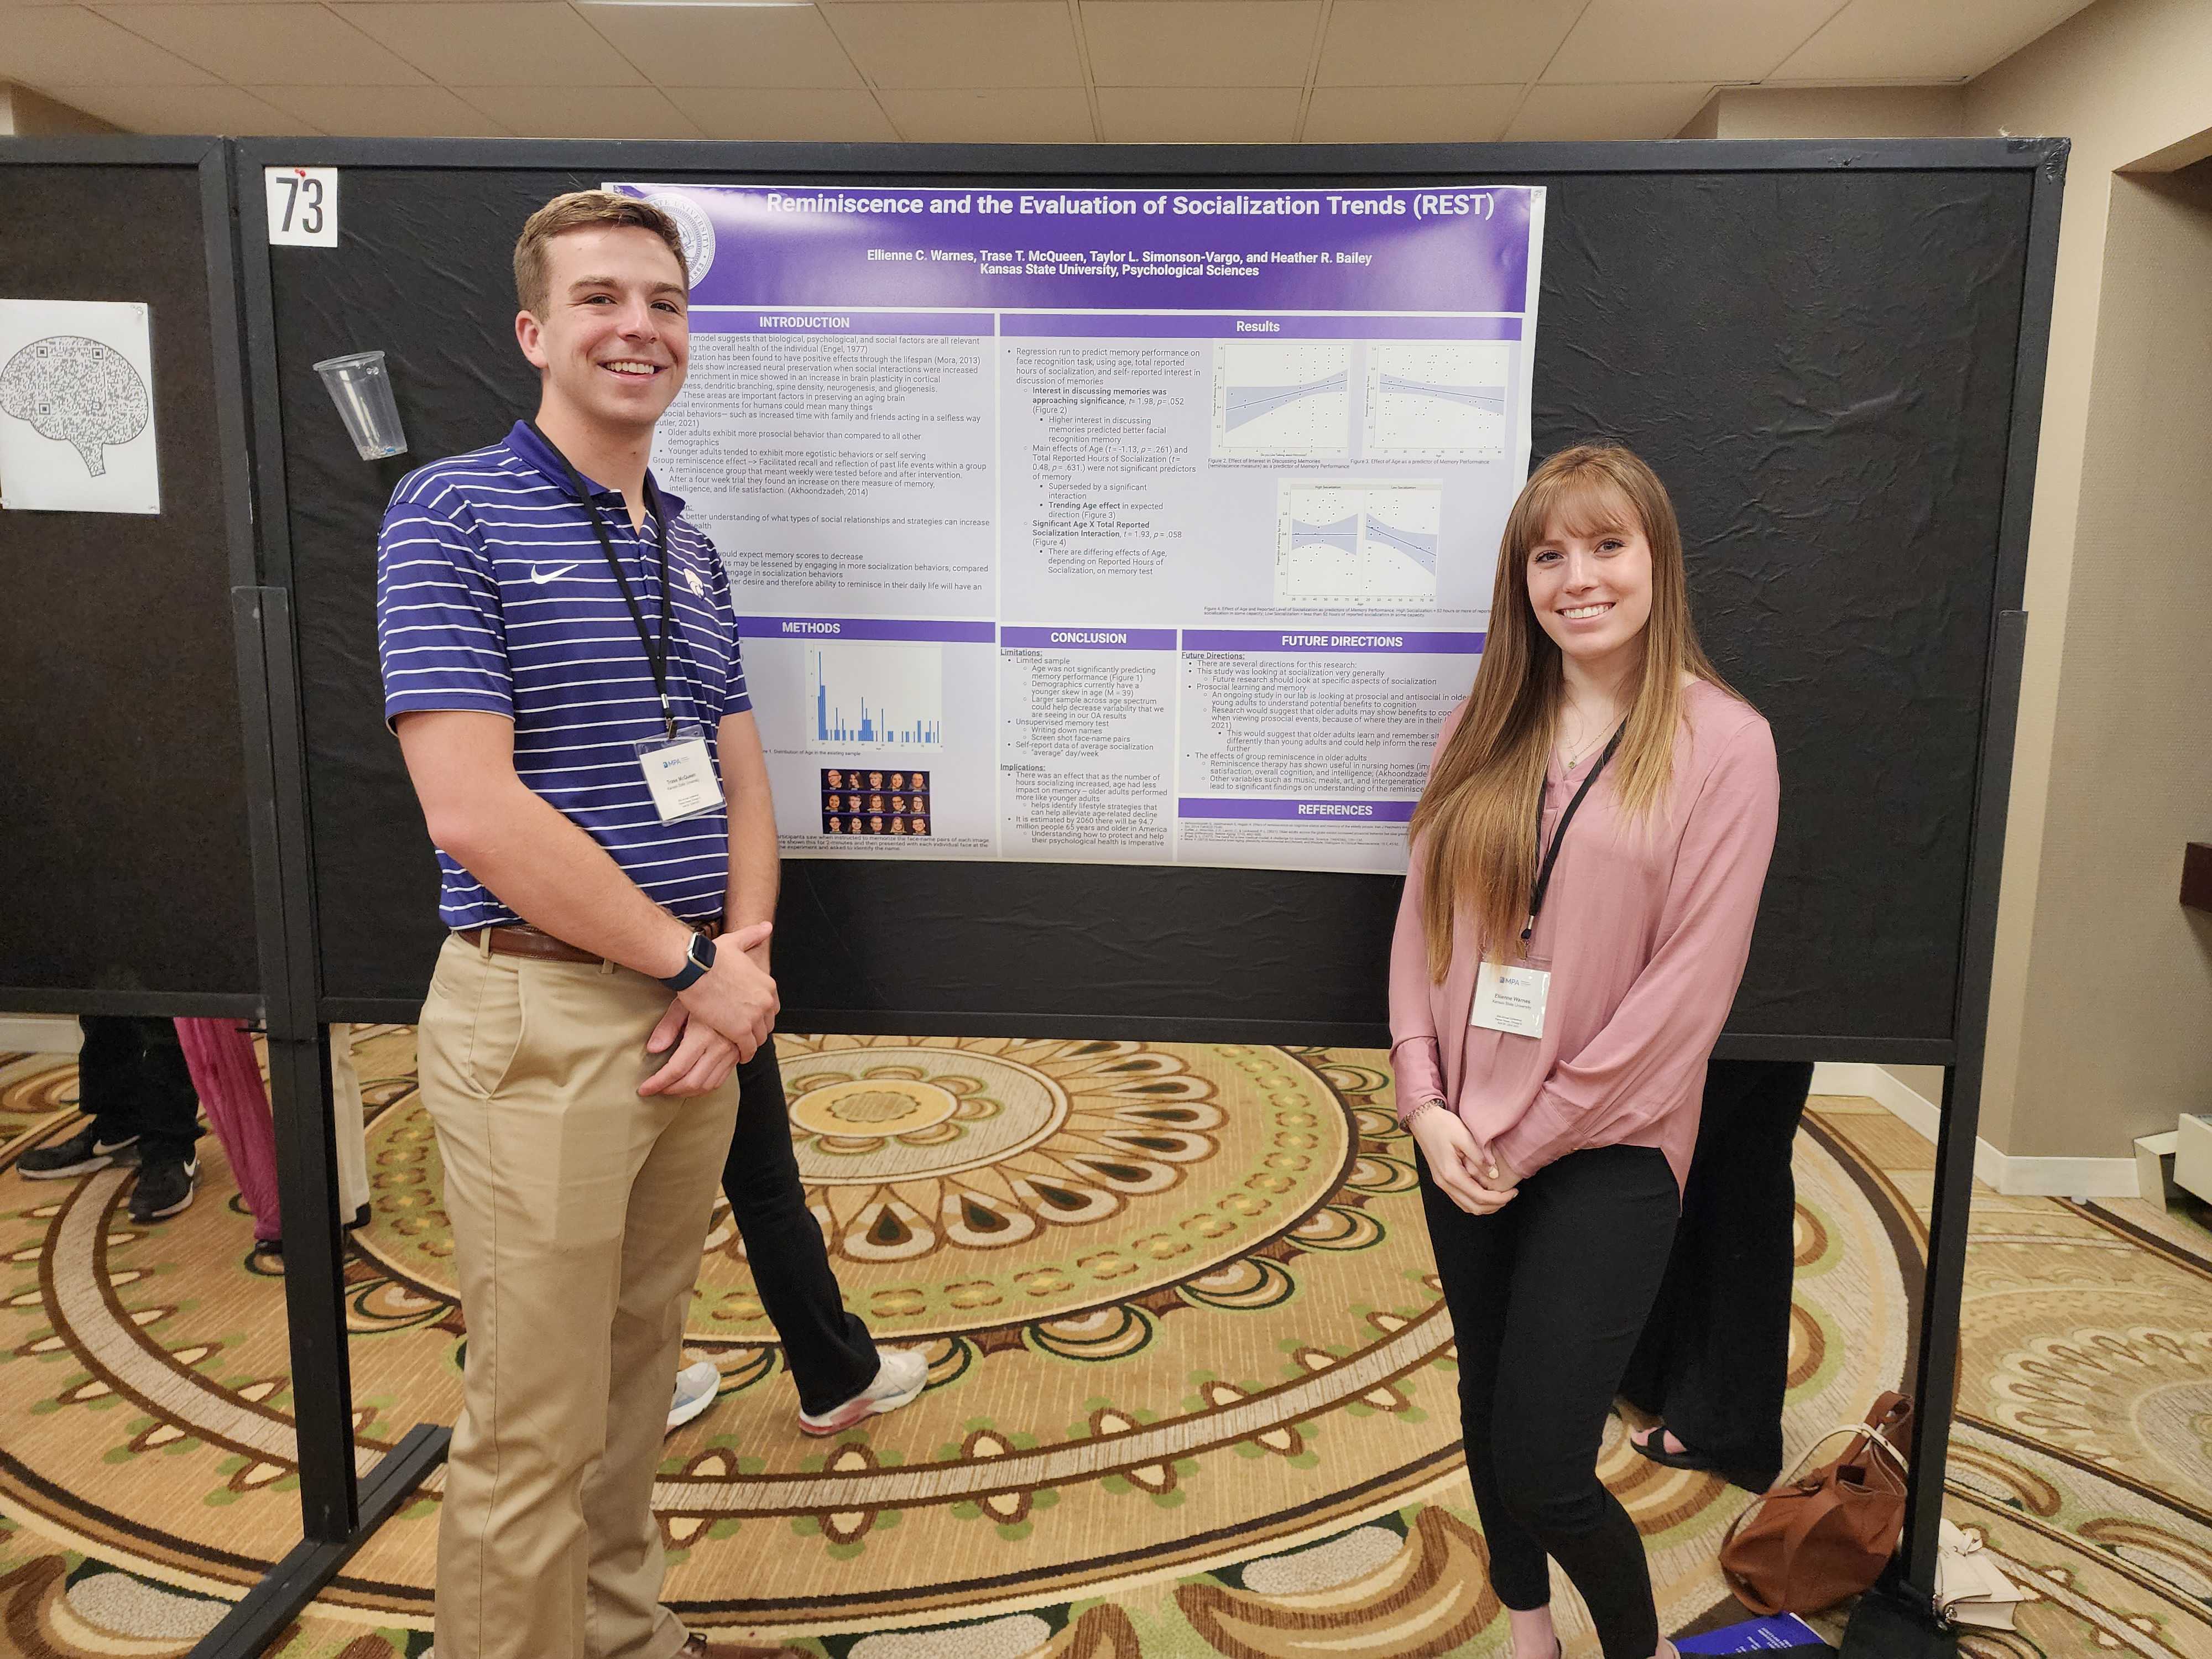 These are undergraduates, Ellie and Trase, presenting their poster called "Reminiscence and the Evaluation of Socialization Trends (REST)".